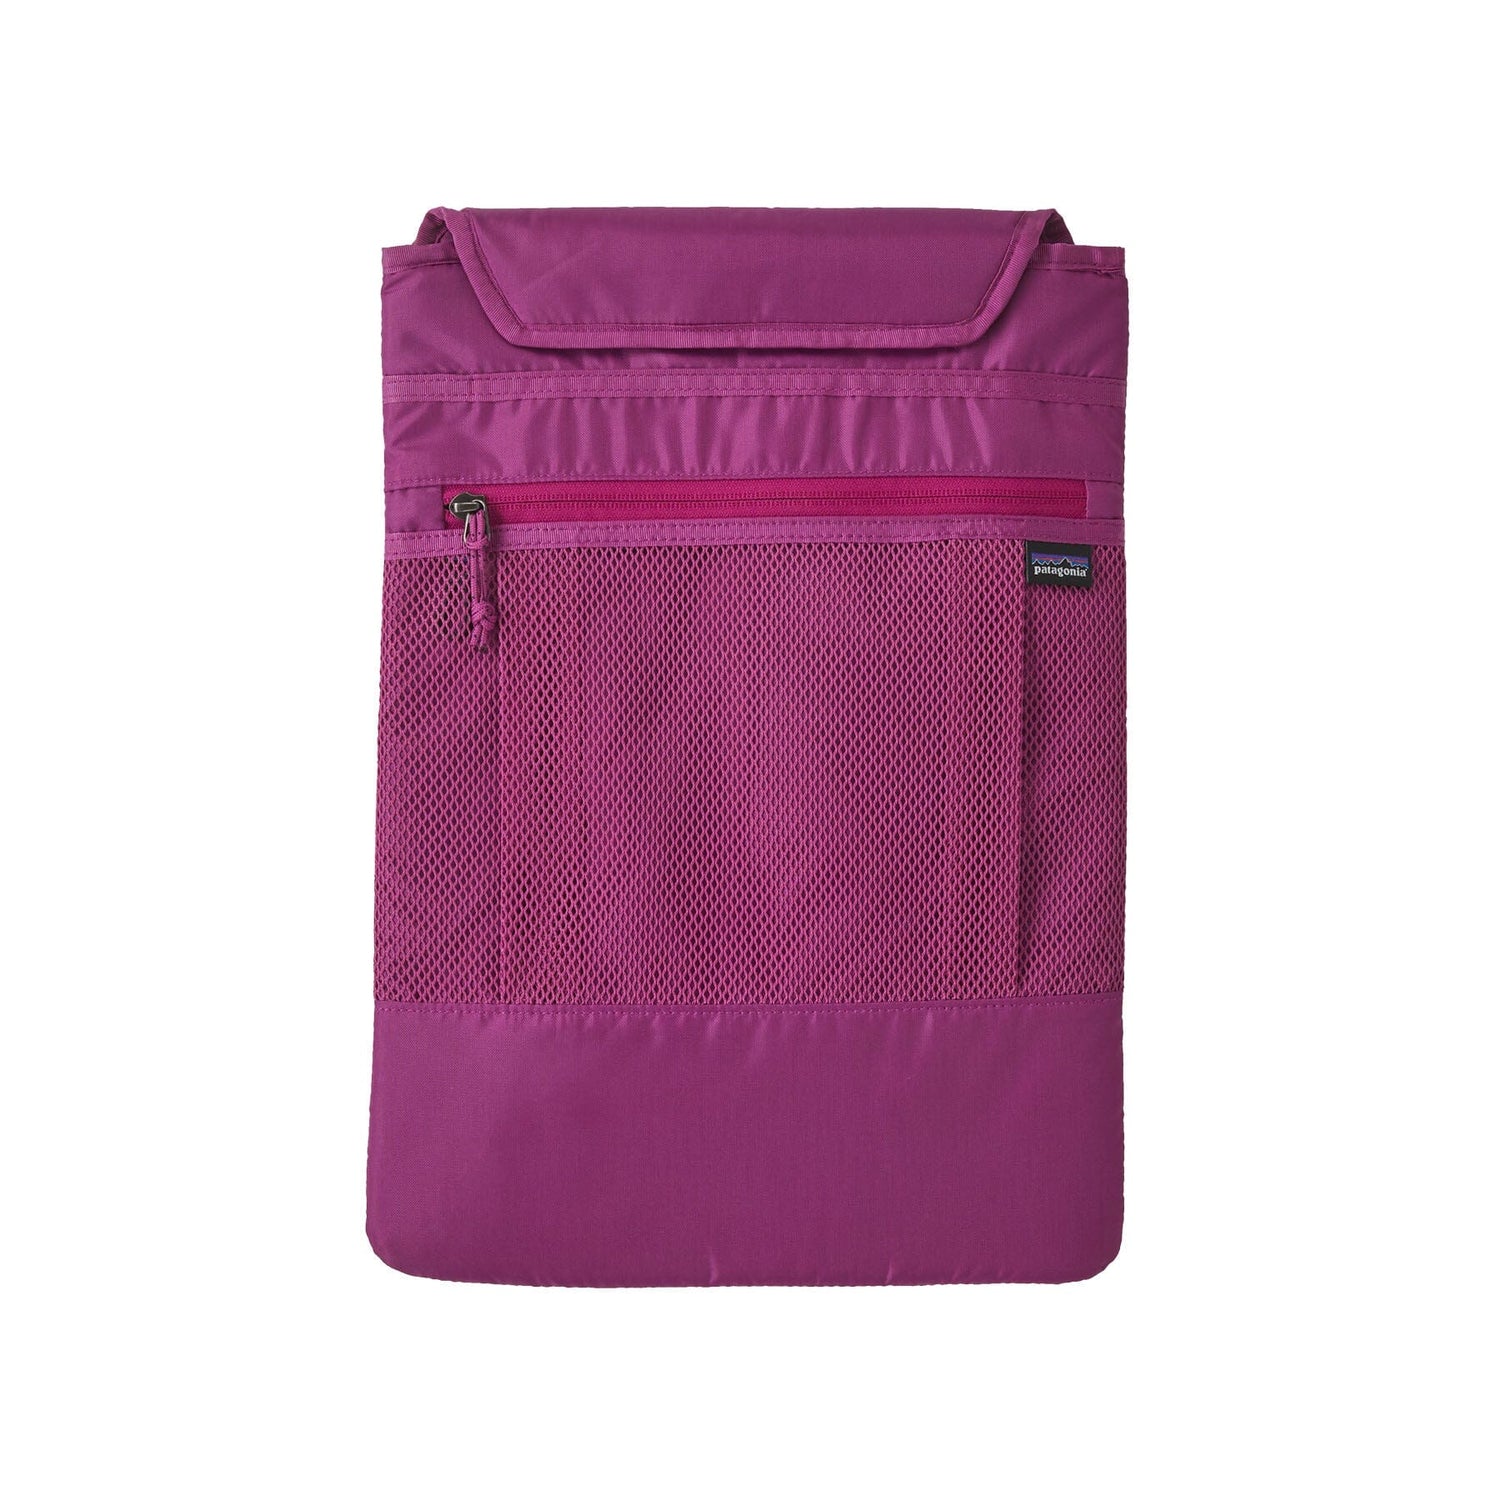 Patagonia - Refugio Day Pack 26L - Recycled Polyester - Weekendbee - sustainable sportswear